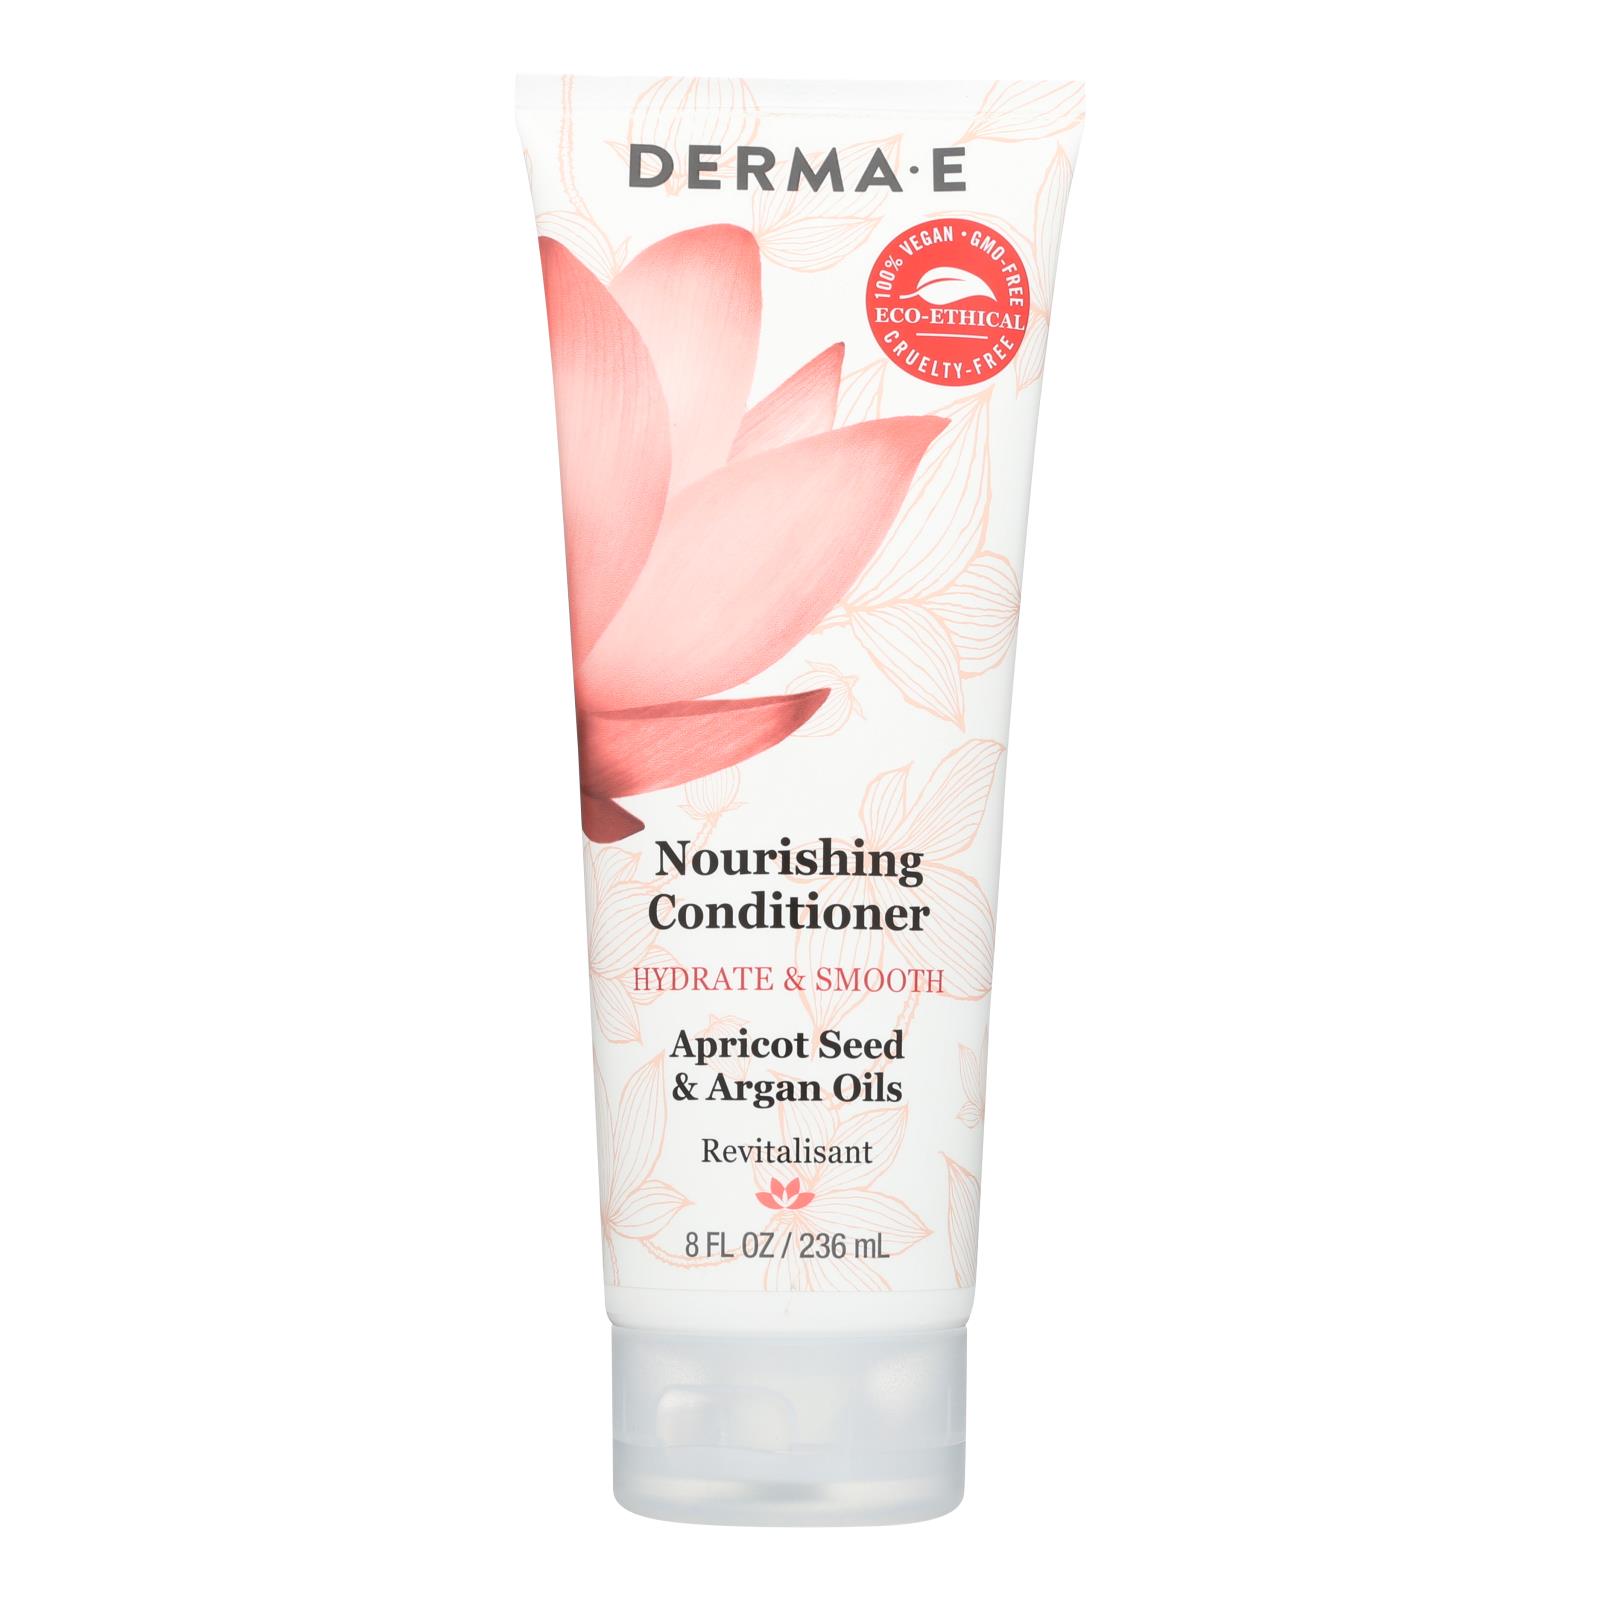 Derma-E Hydrate & Smooth Nourishing Conditioner, Apricot Seed And Argan Oil - 1 Each - 10 FZ